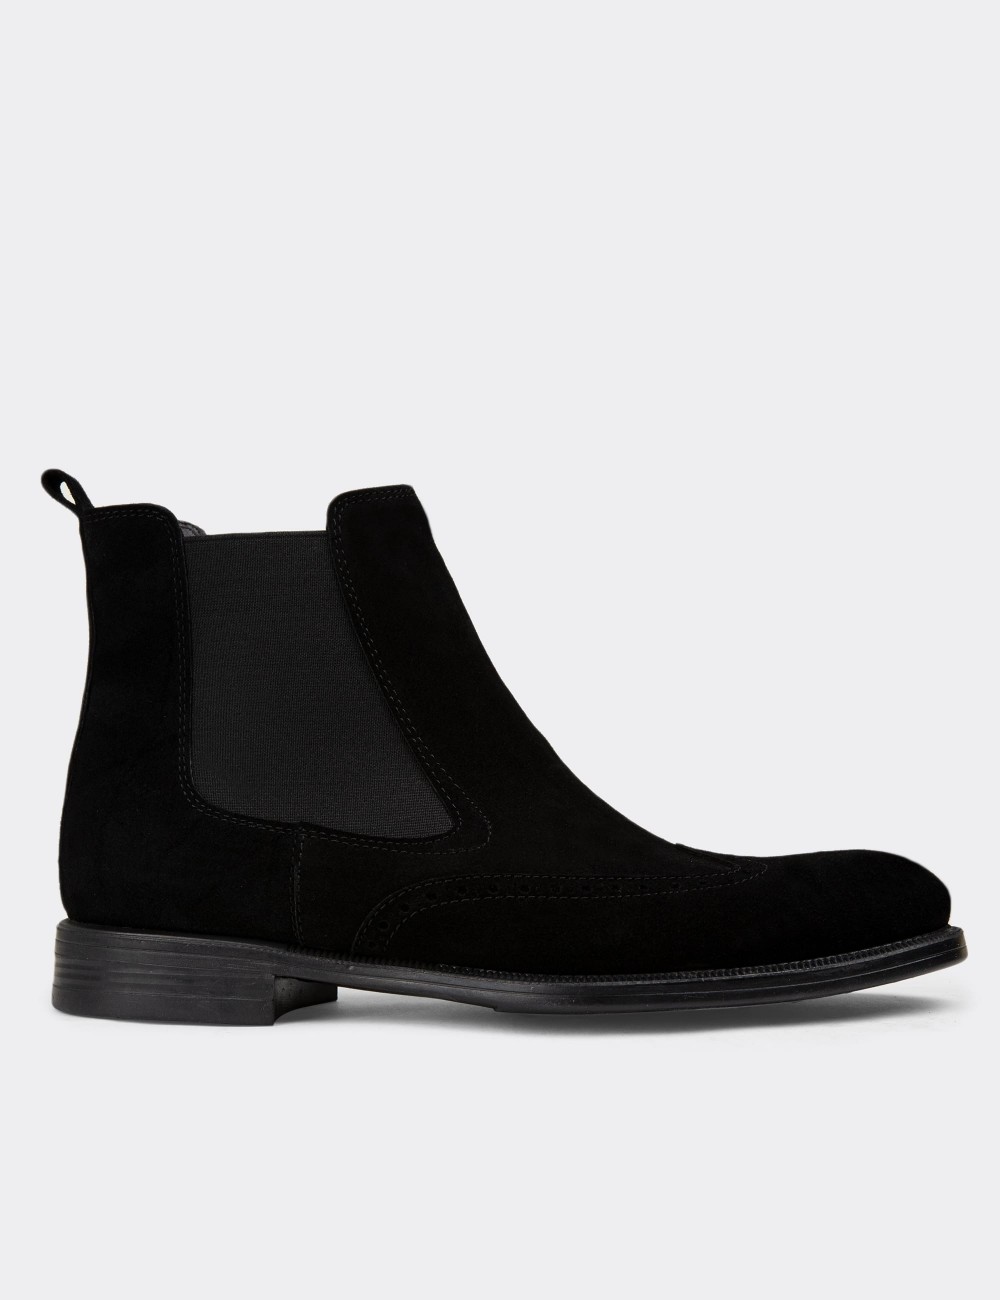 Black Suede Leather Chelsea Boots - 01920MSYHC01